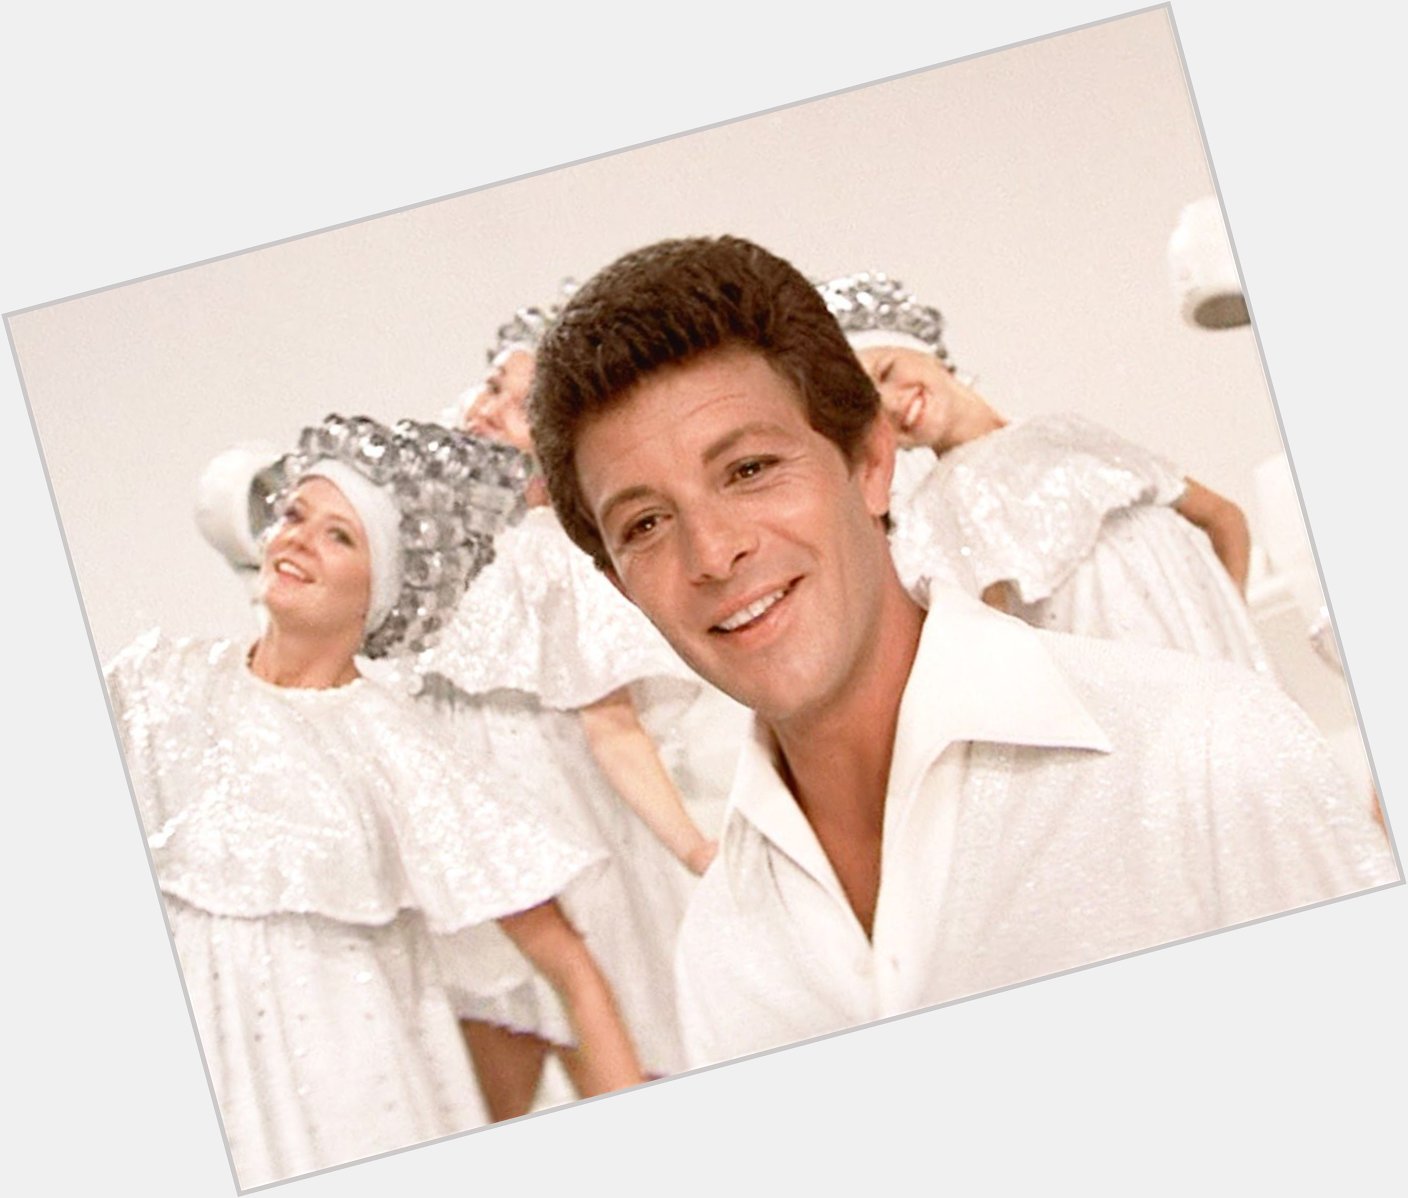 Happy birthday Frankie Avalon, here as Teen Angel in Grease,(1978) 